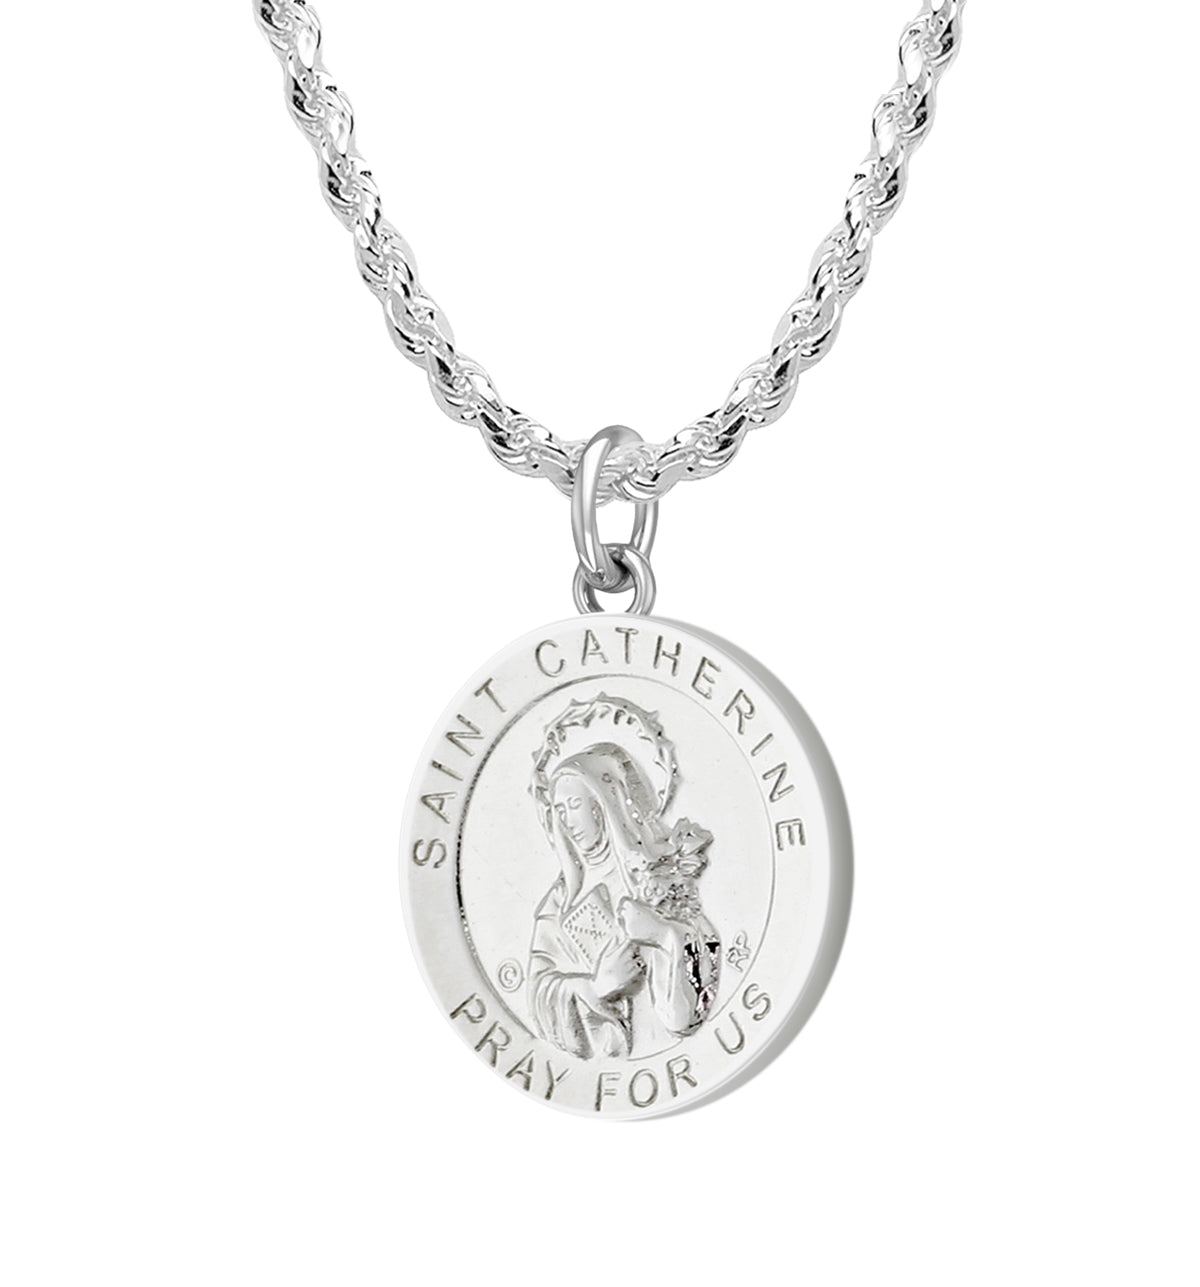 Ladies 925 Sterling Silver 18.5mm Polished Saint Catherine Medal Pendant Necklace - US Jewels